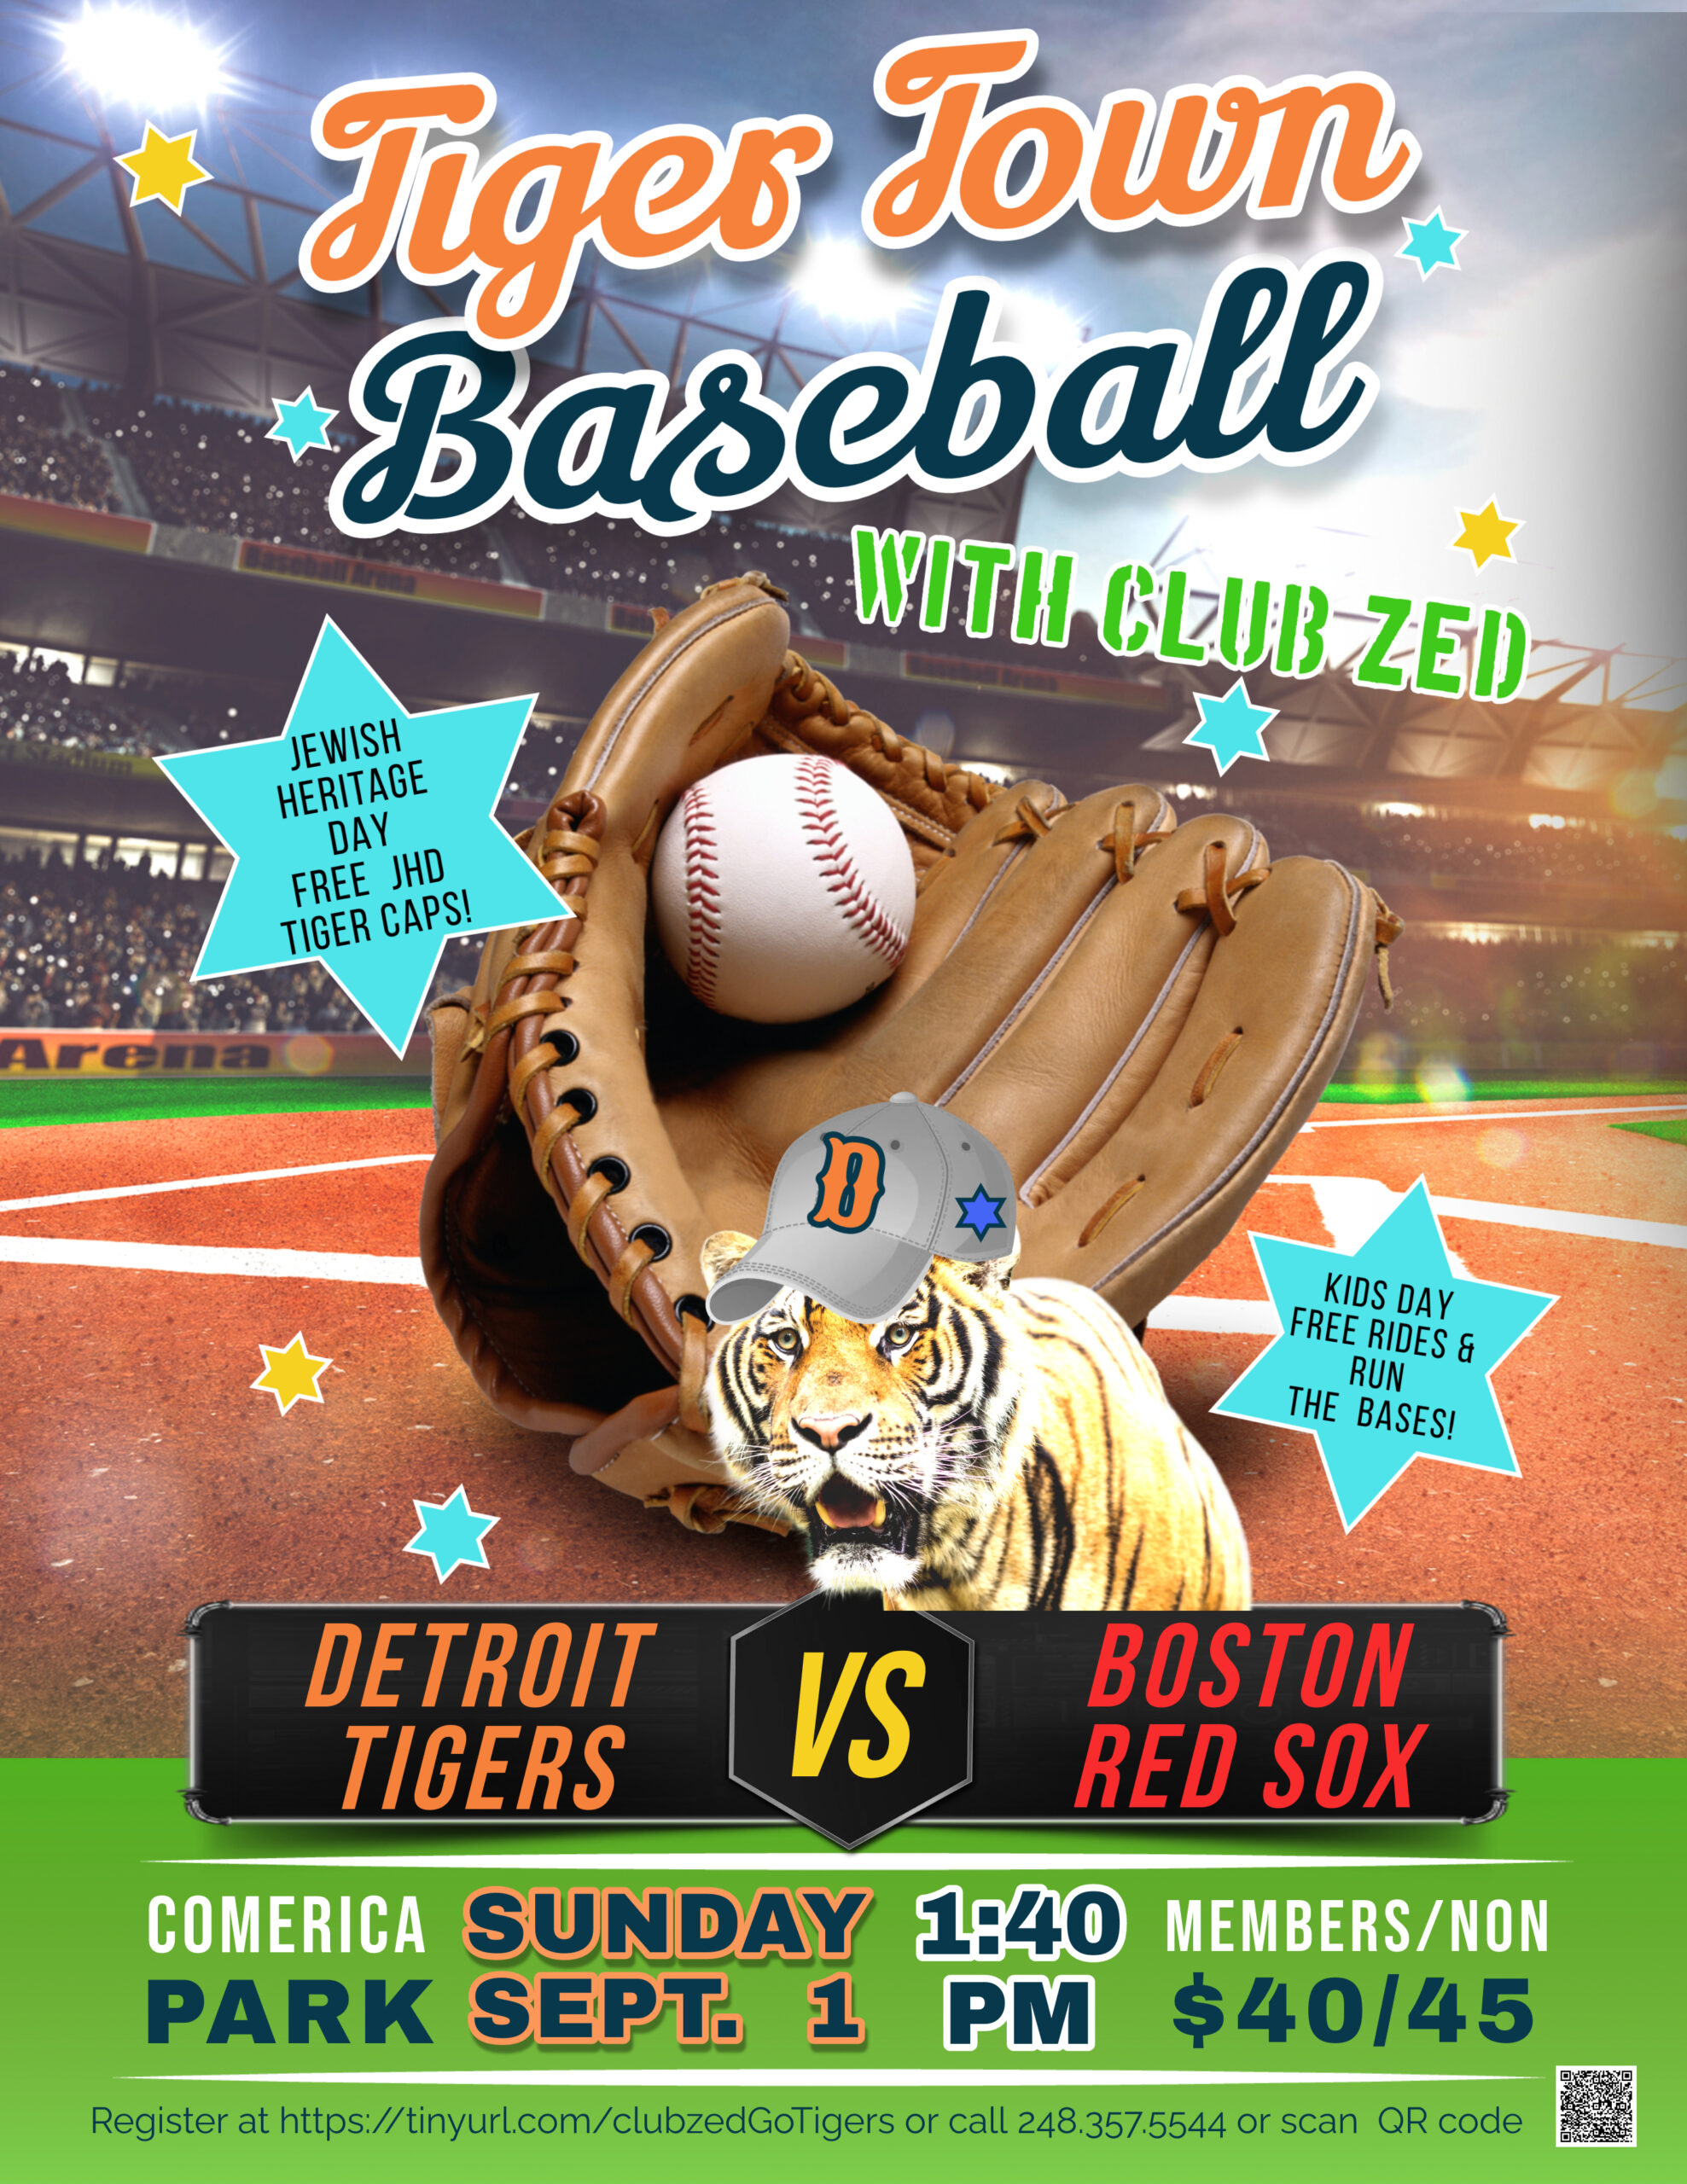 TIGER TOWN WITH CLUB ZED Jewish Heritage Day at Comerica Park